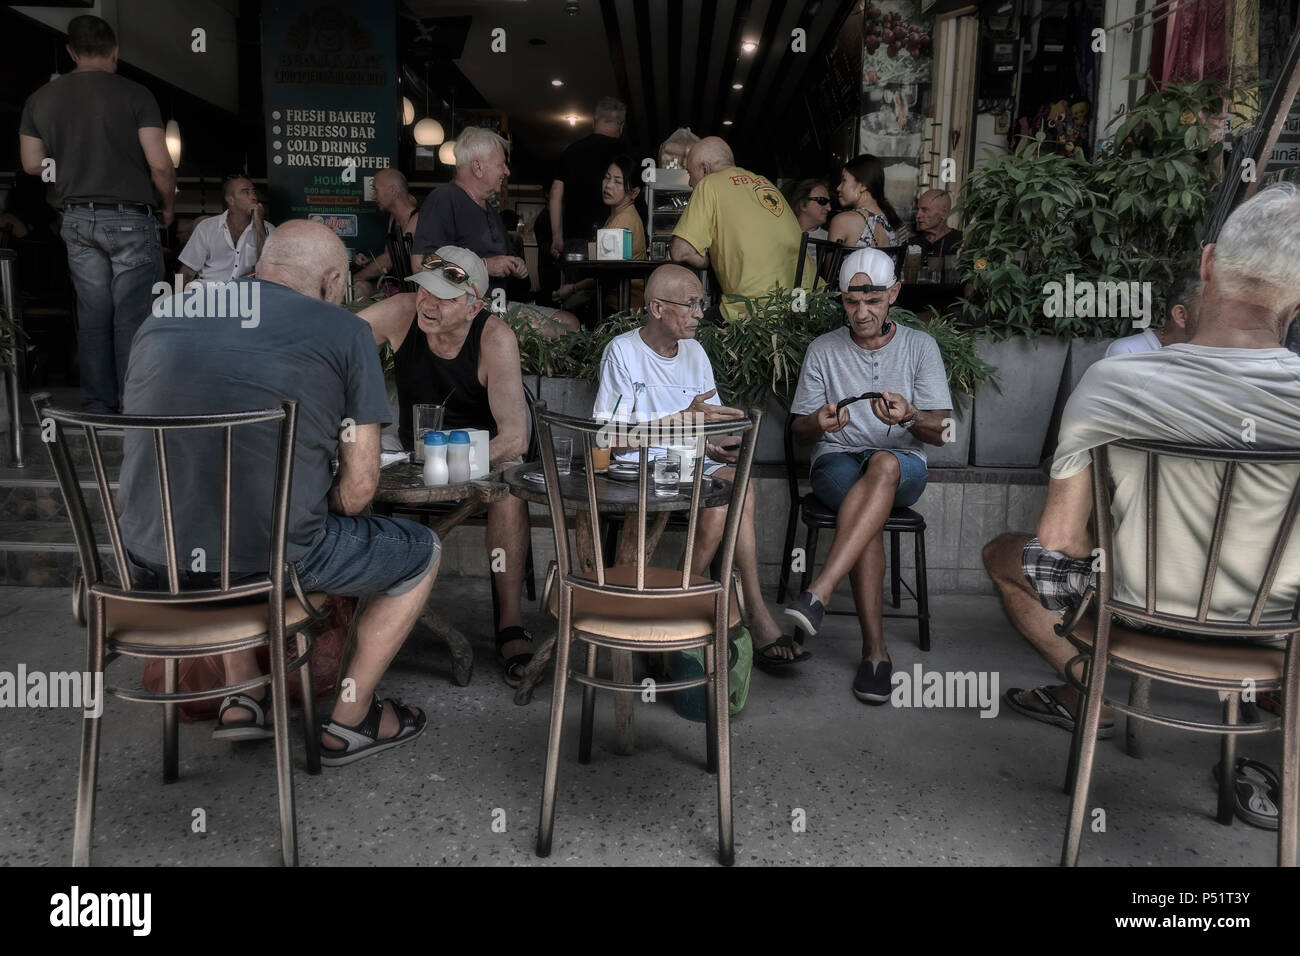 Passing the time of day. People at a pavement cafe Stock Photo